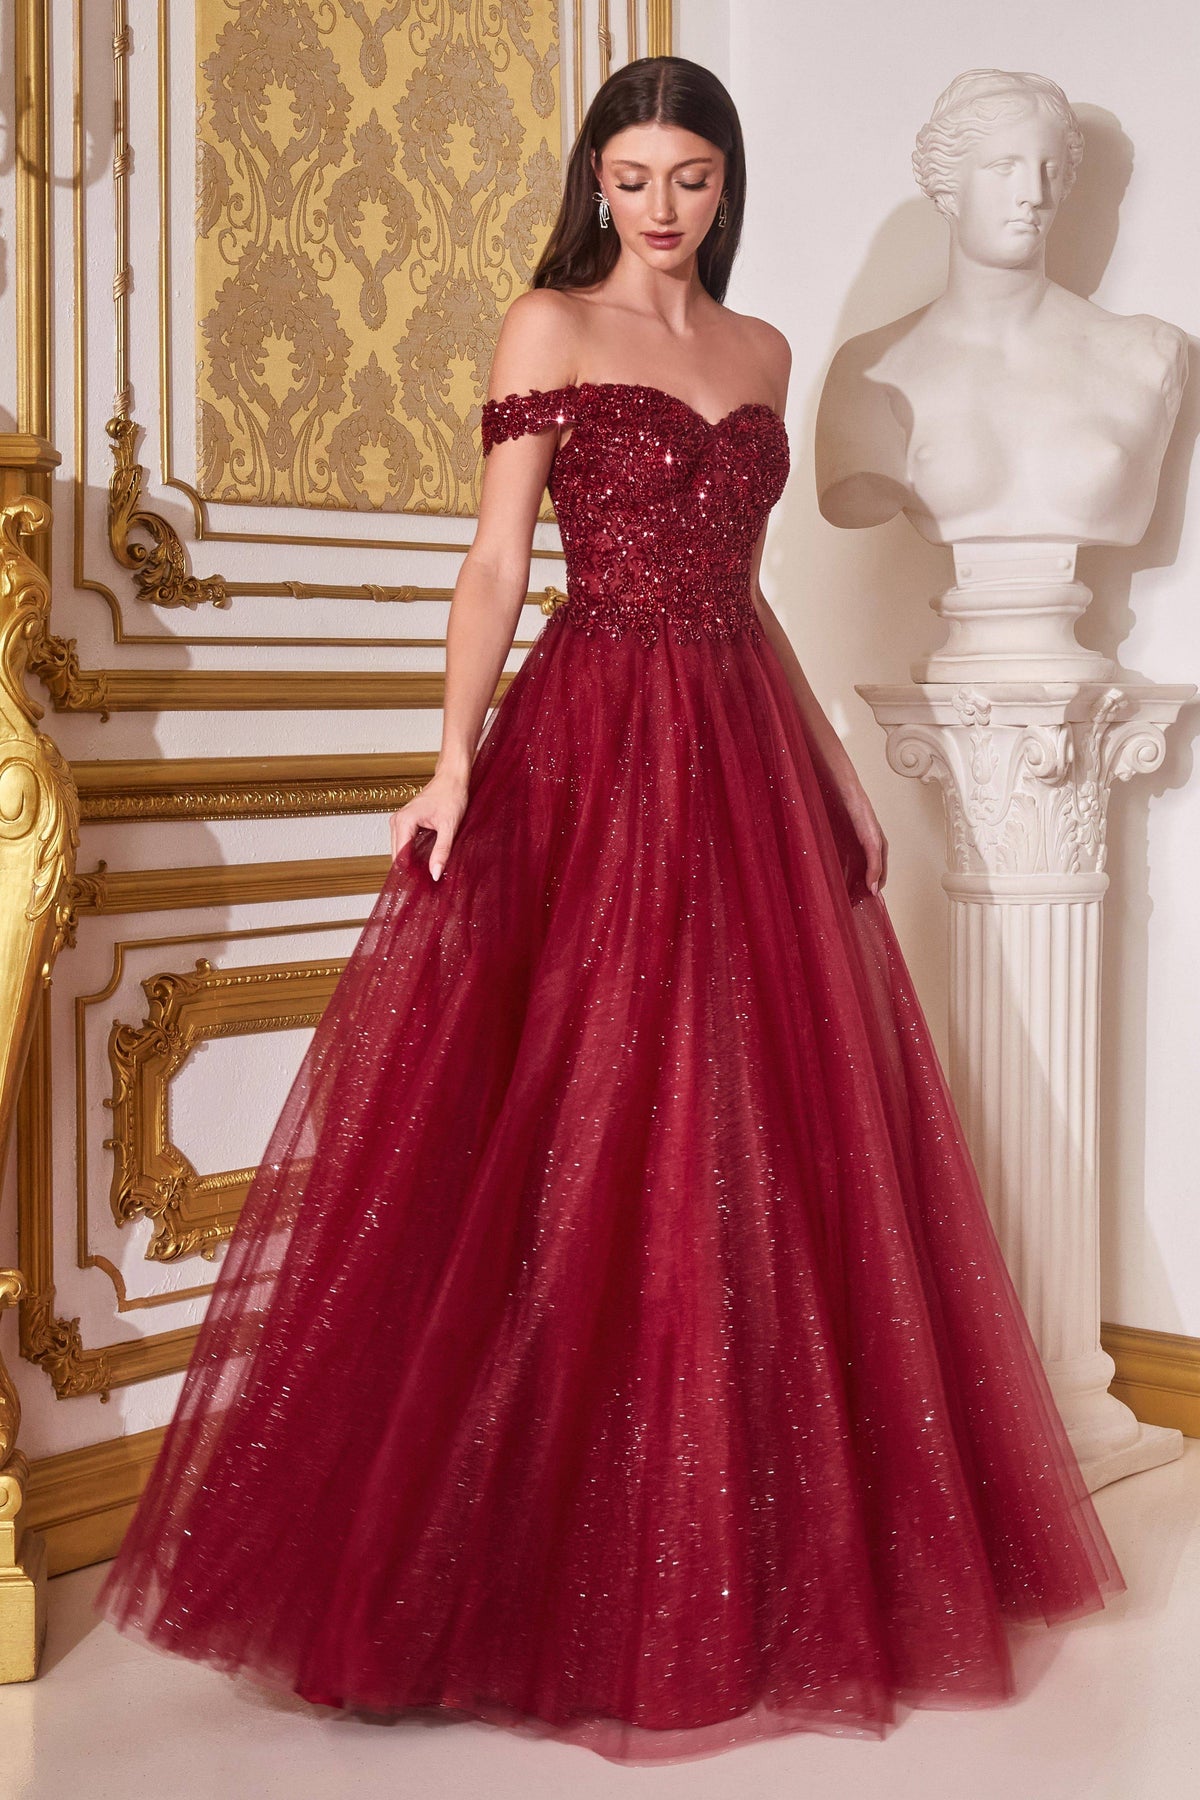 Cinderella Divine CD0177 Princess Ball Gown with Glitter Bodice and Layered Skirt - NORMA REED